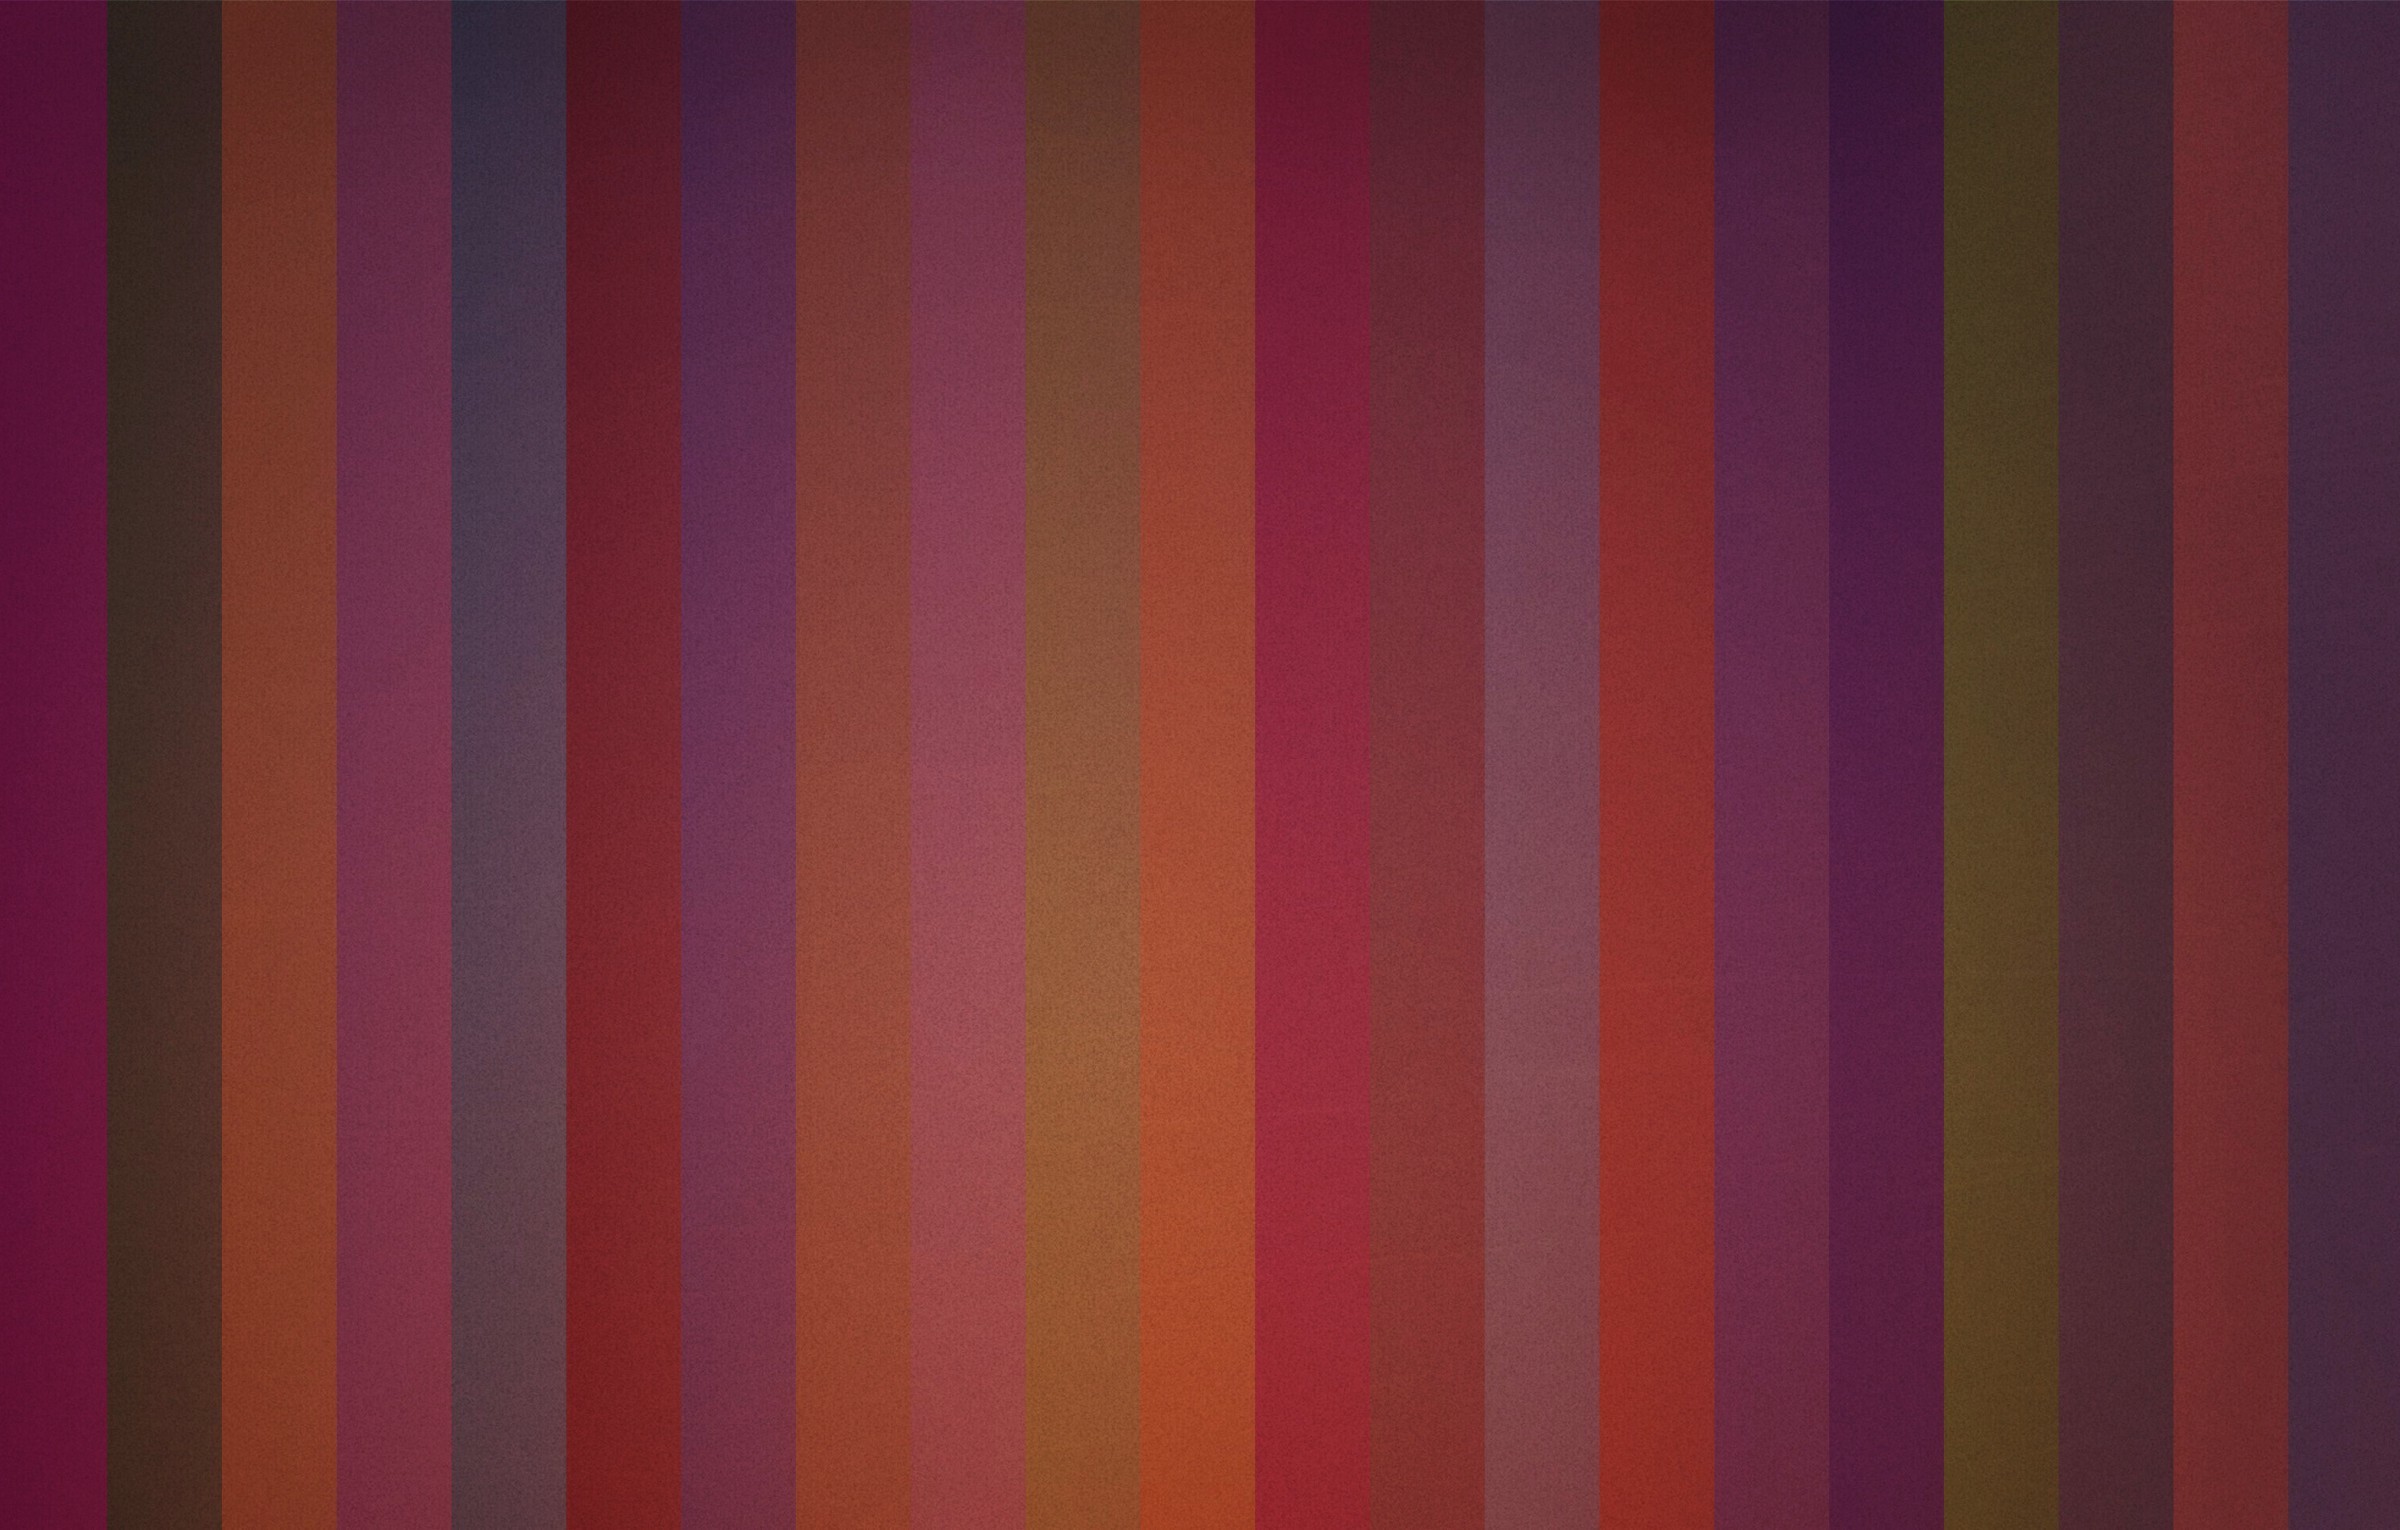 General 2400x1530 wall lines colorful abstract